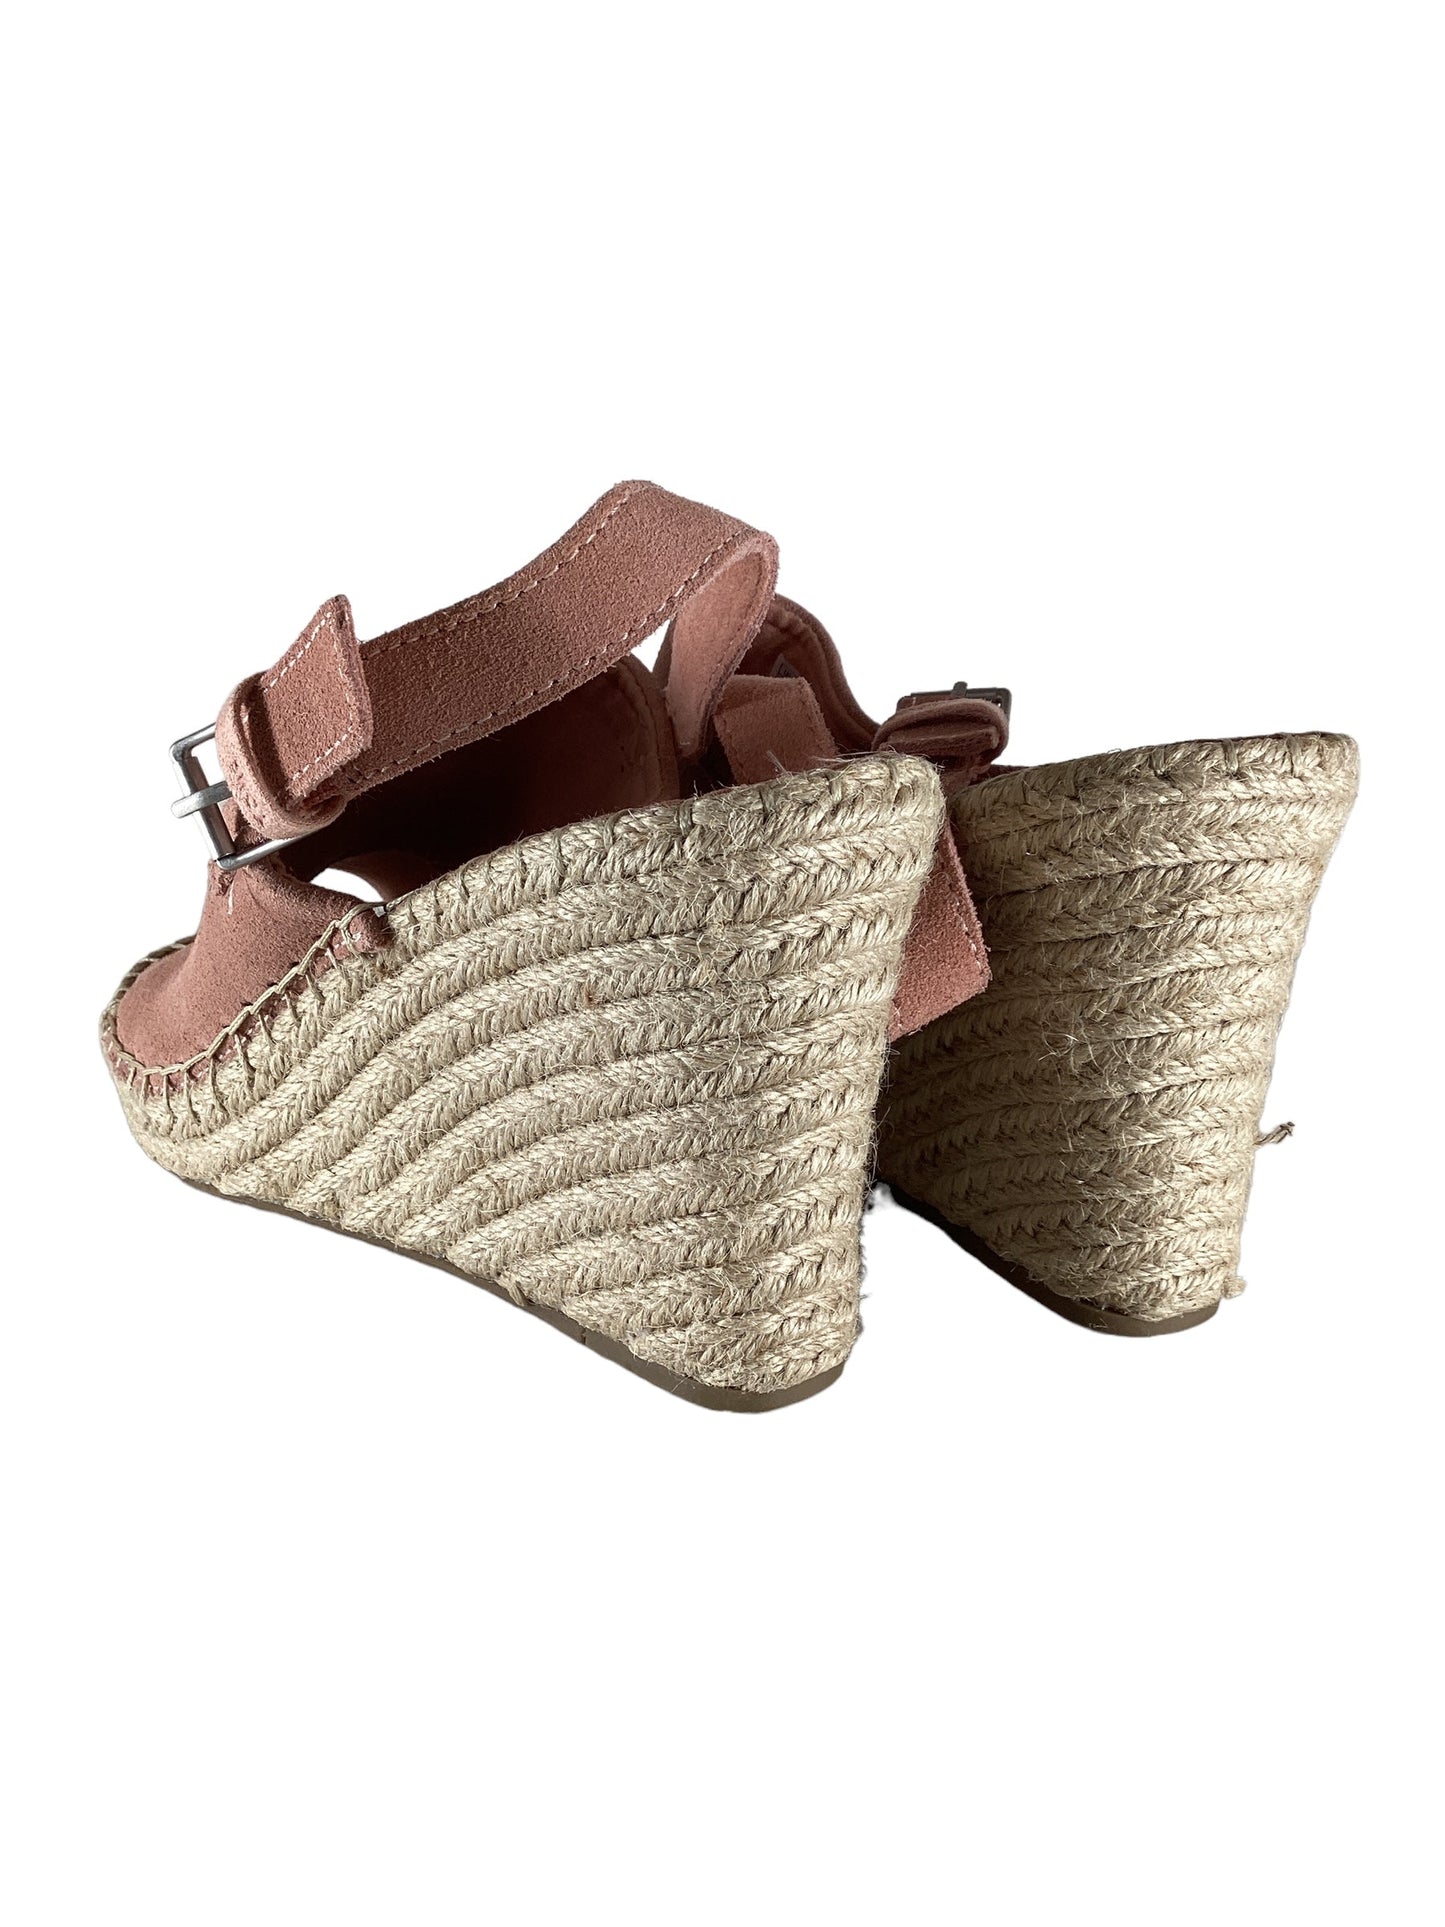 Sandals Heels Wedge By Toms  Size: 9